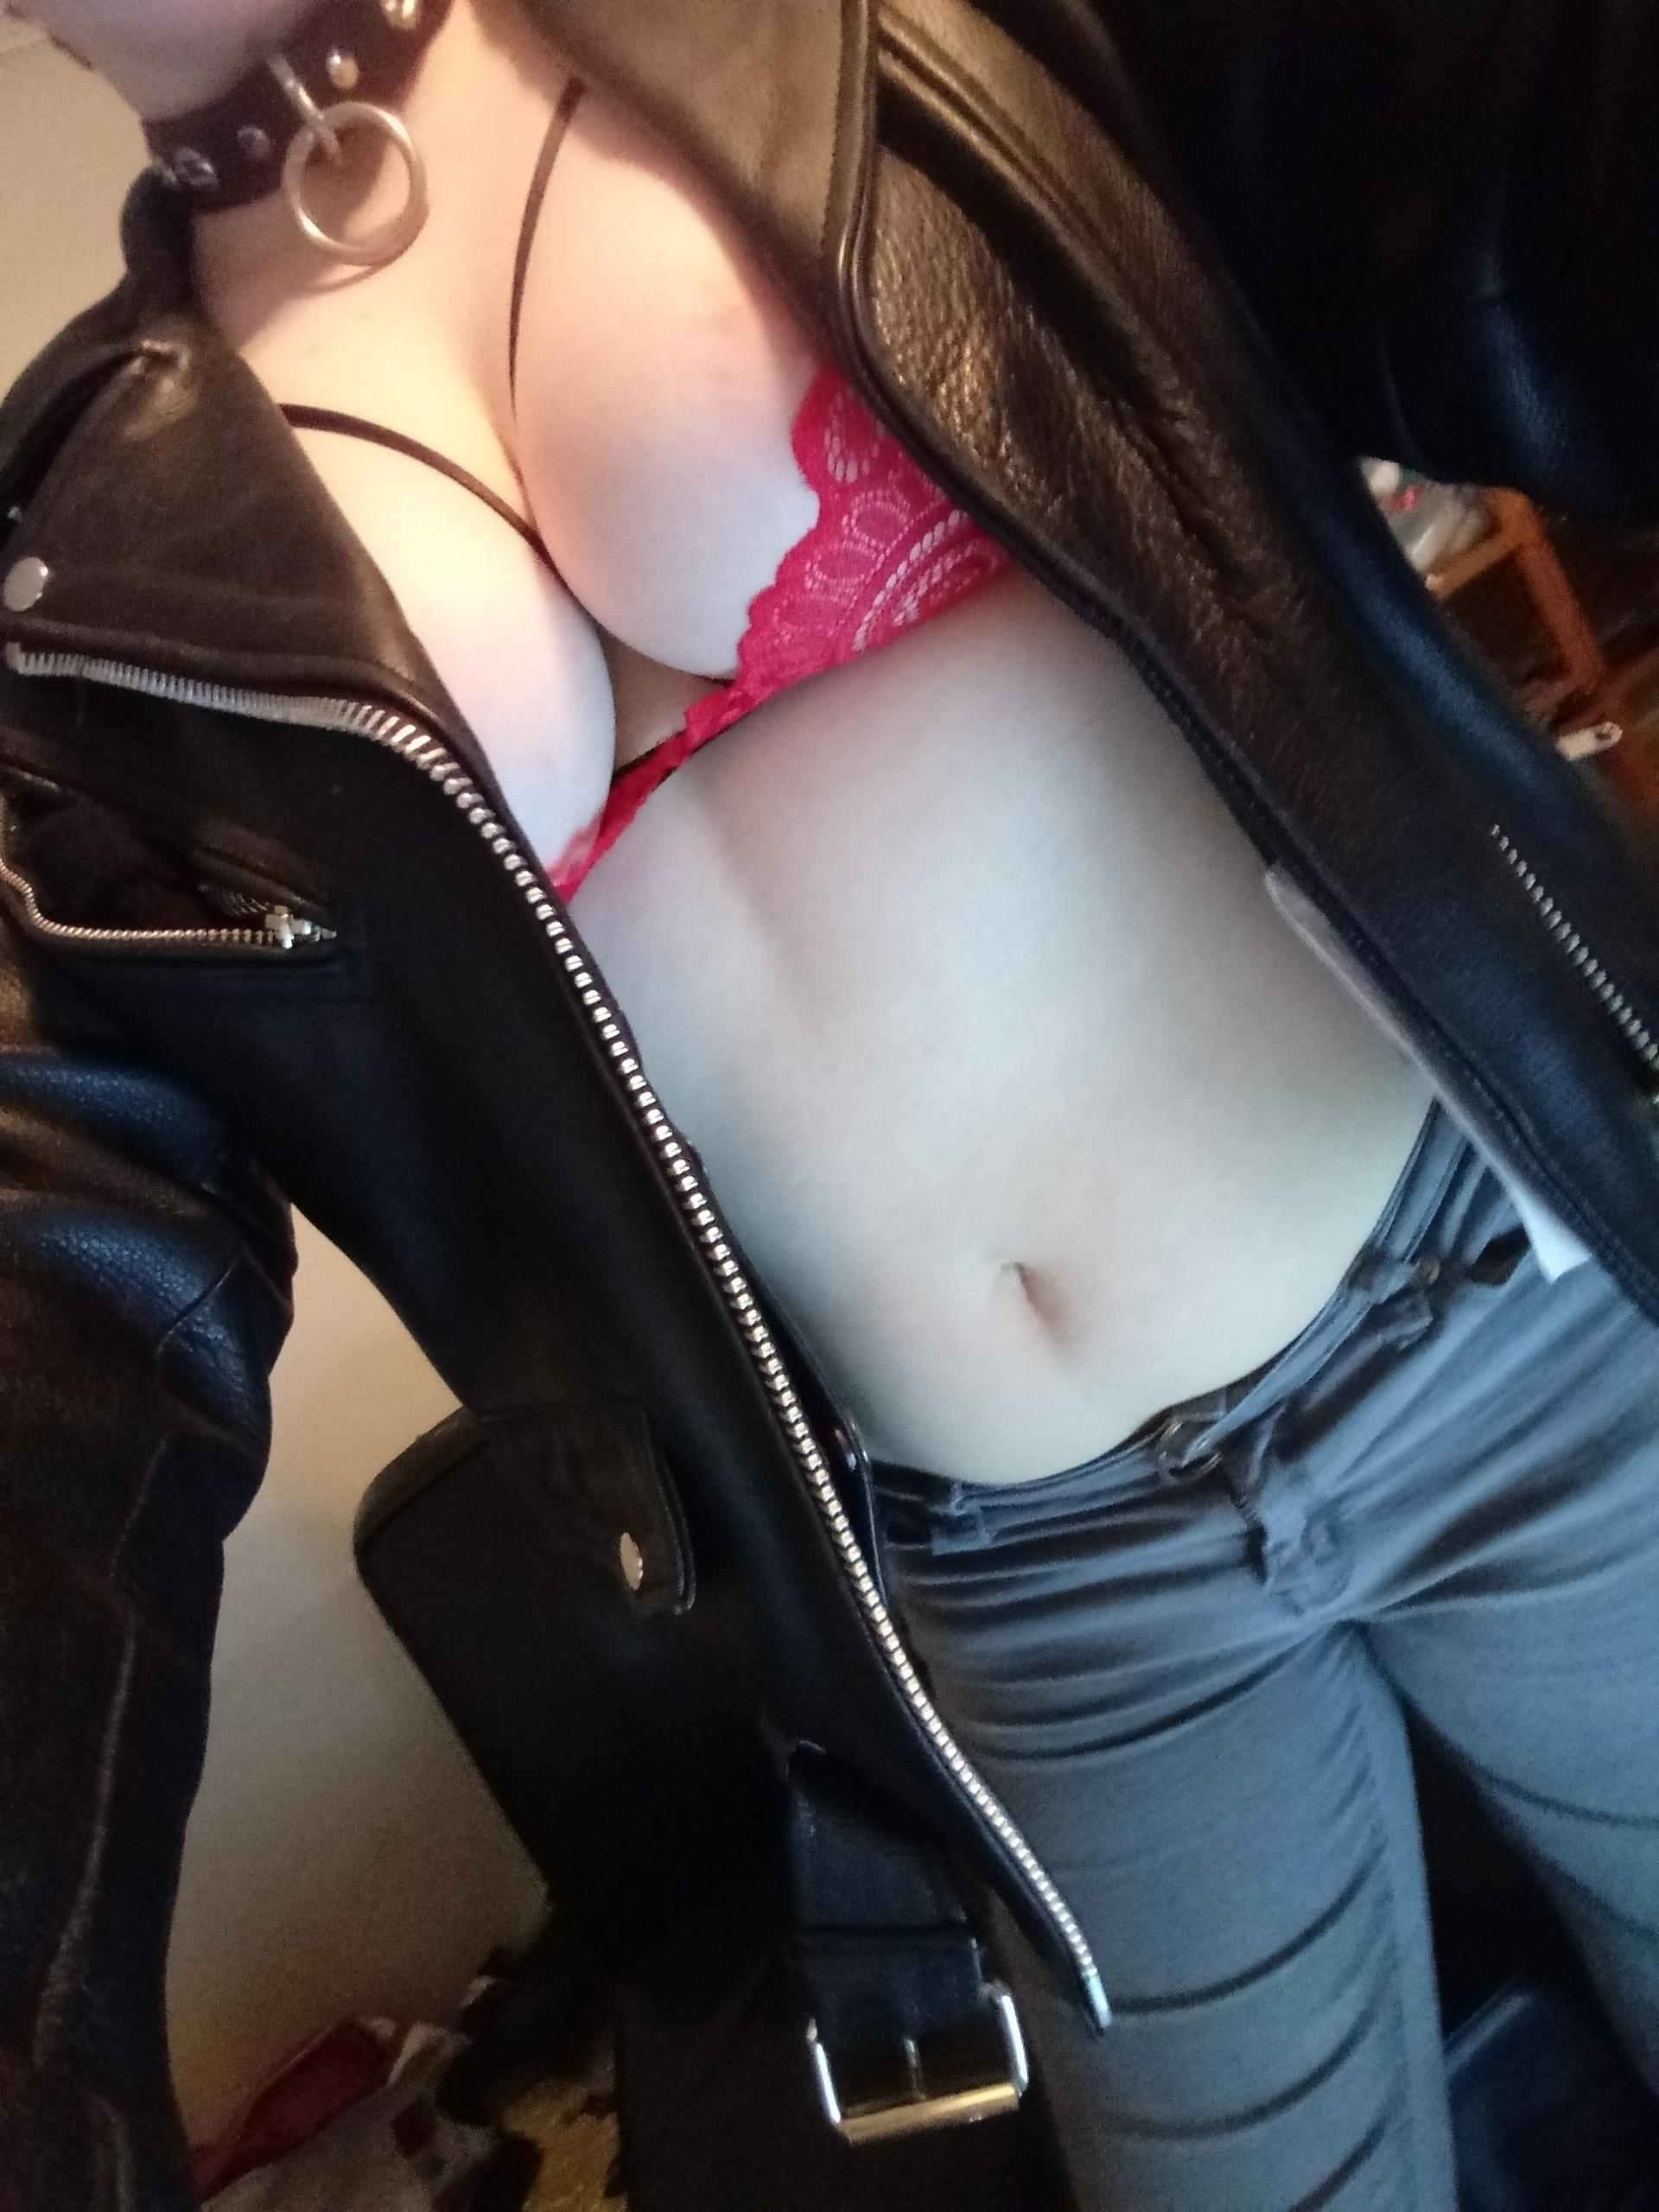 Leather Tits - DDD tits, leather jacket Porn Pic - EPORNER